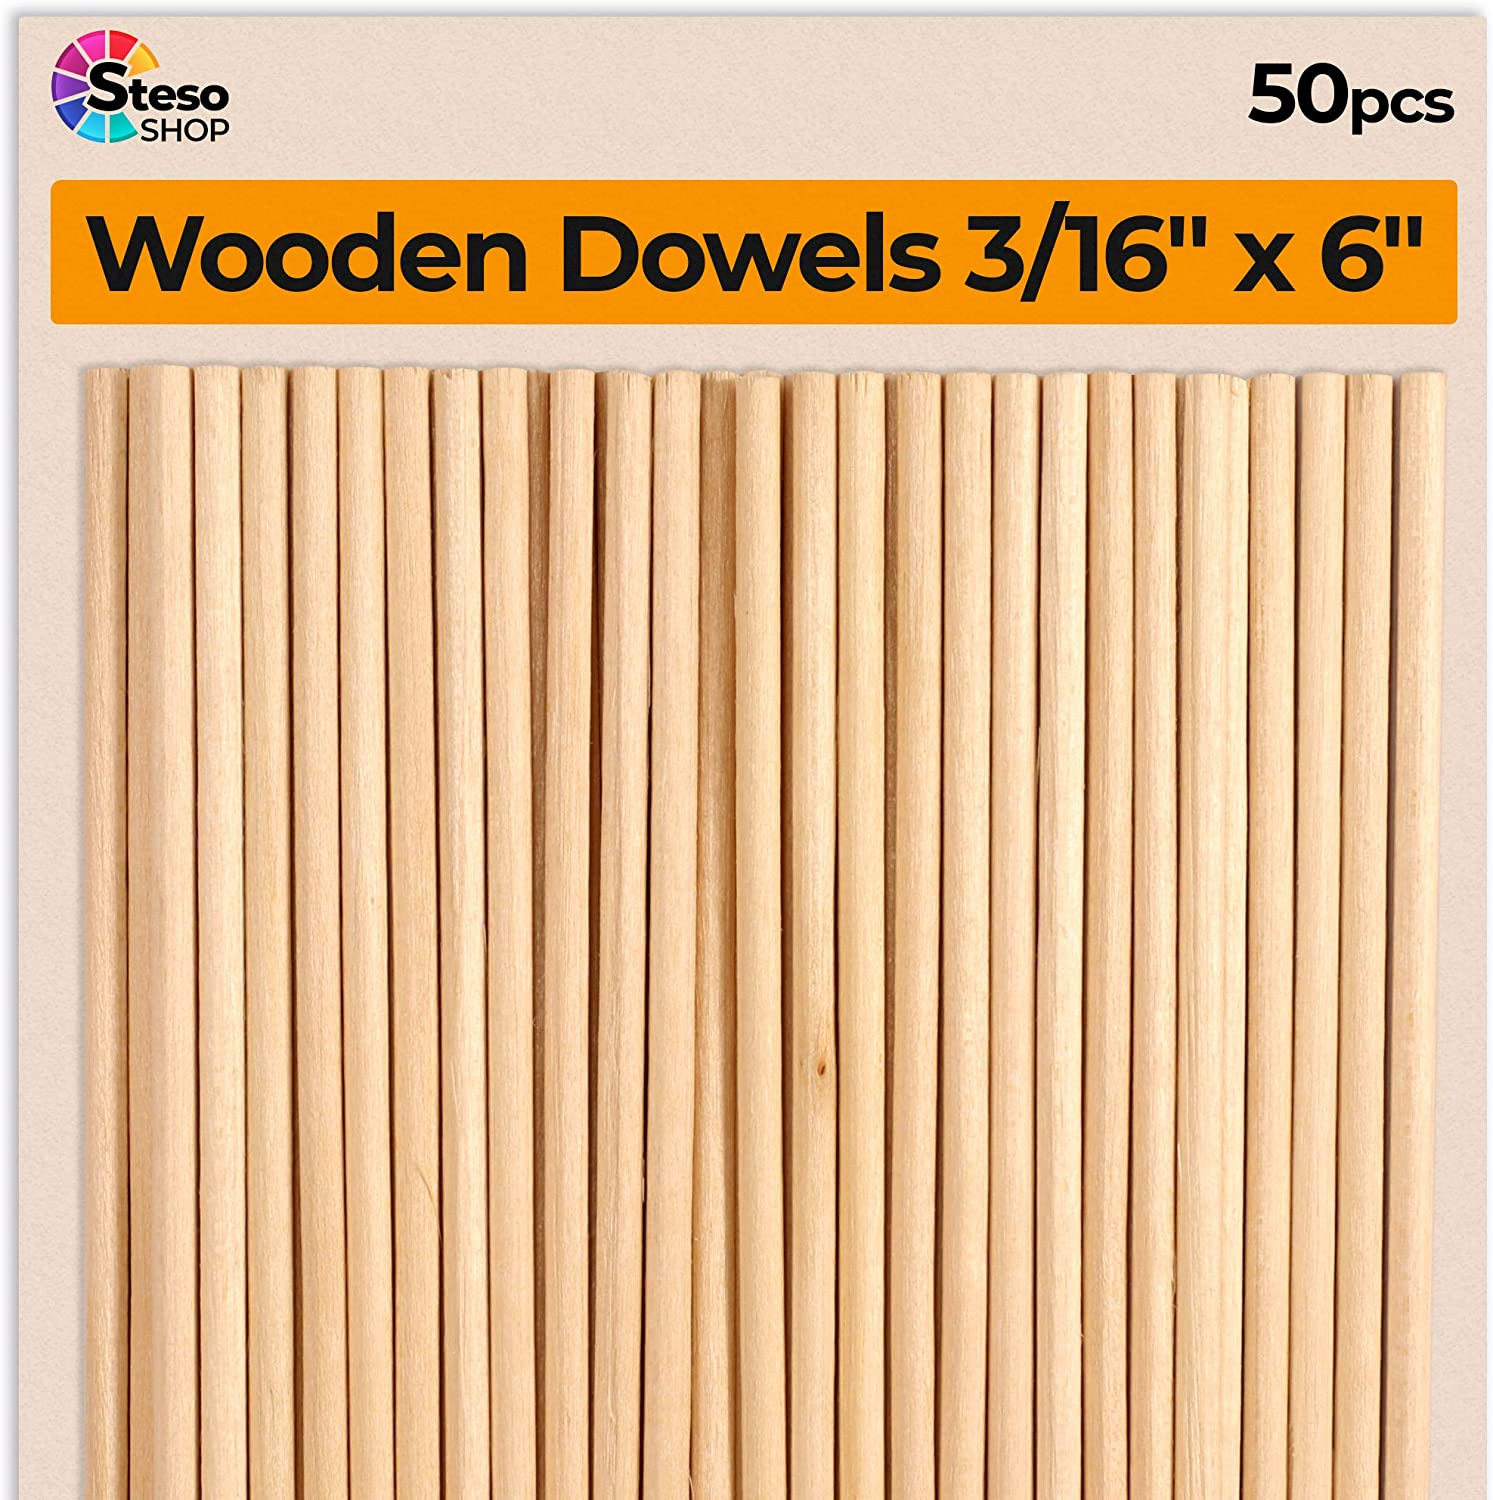 Wooden Dowel Rods 6 Inch - 3/16 Hardwood Dowels Wood - Craft Dowels For Project